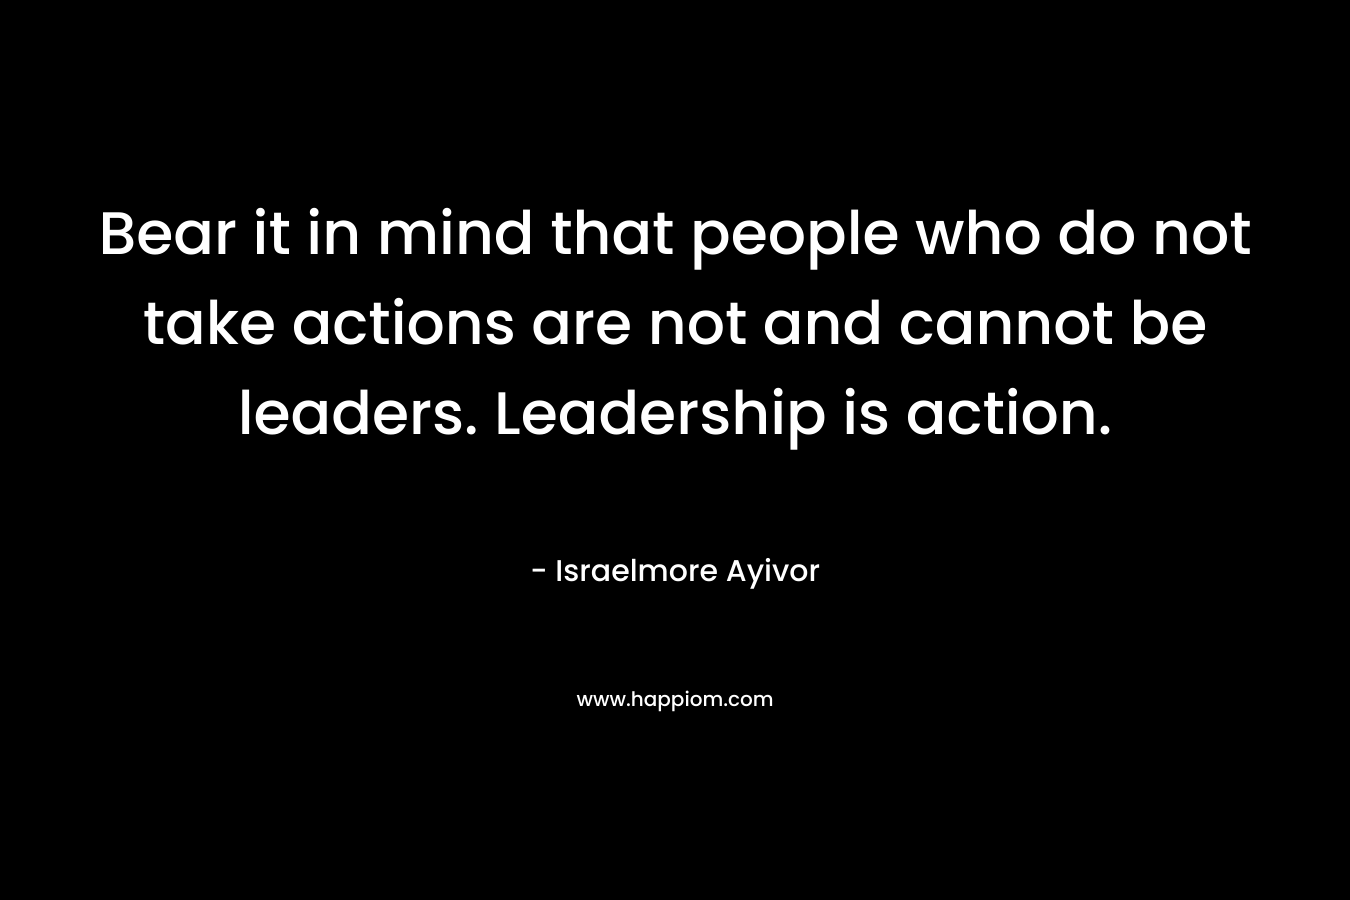 Bear it in mind that people who do not take actions are not and cannot be leaders. Leadership is action.